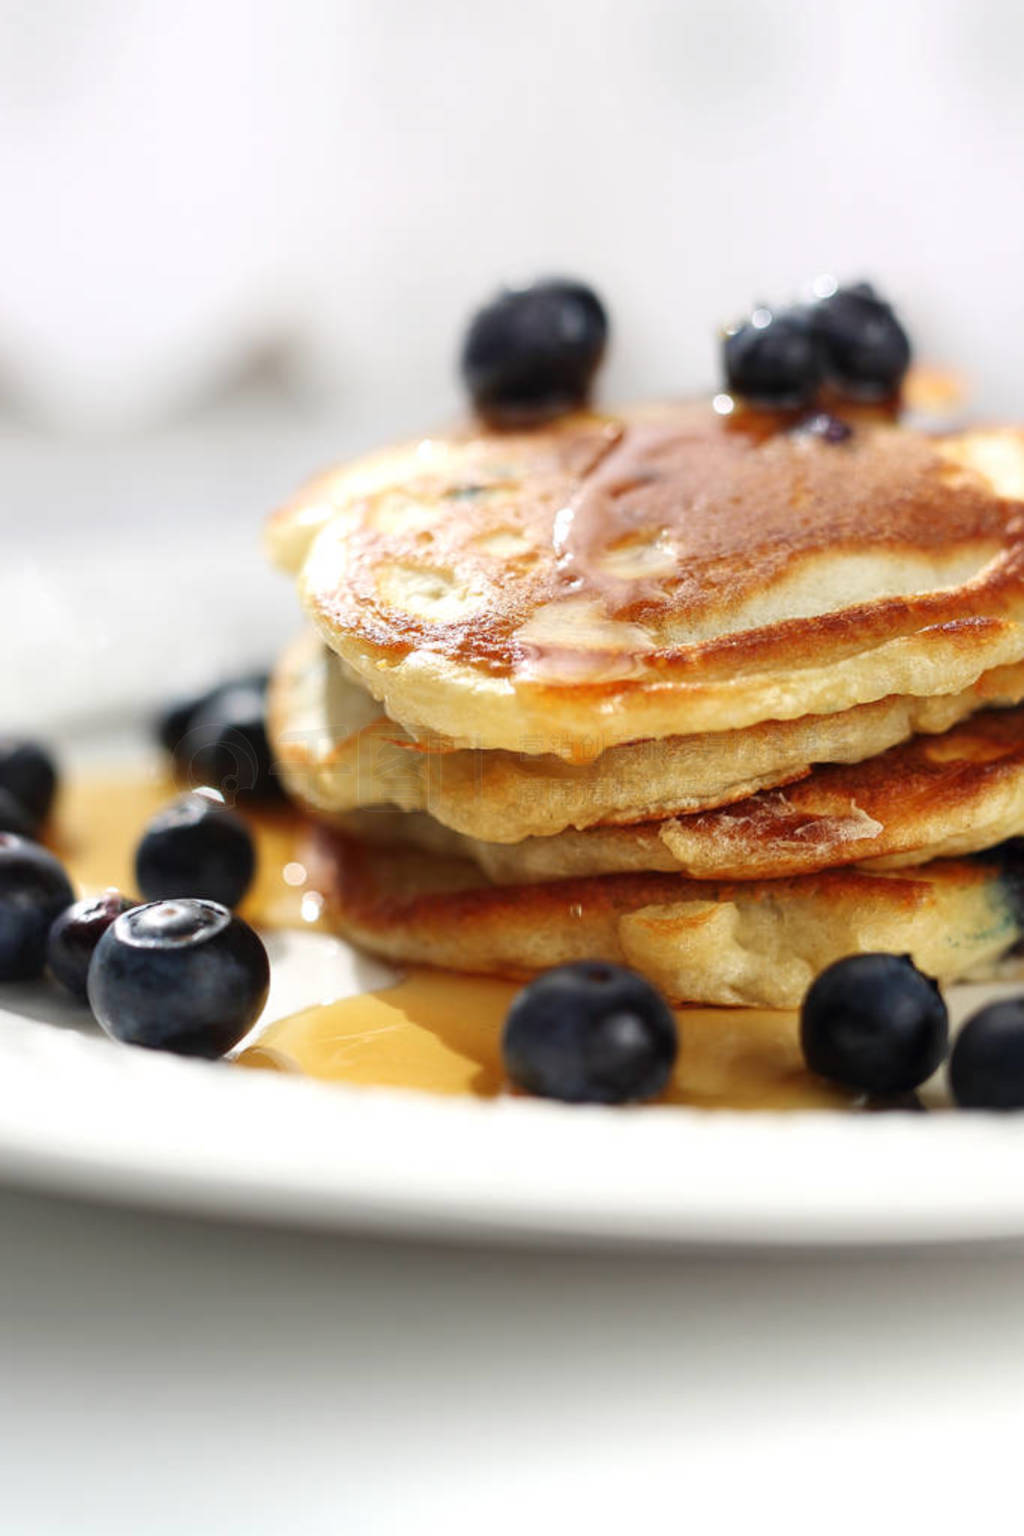 Pancakes with blueberries and maple syrup. Sweet breakfast.